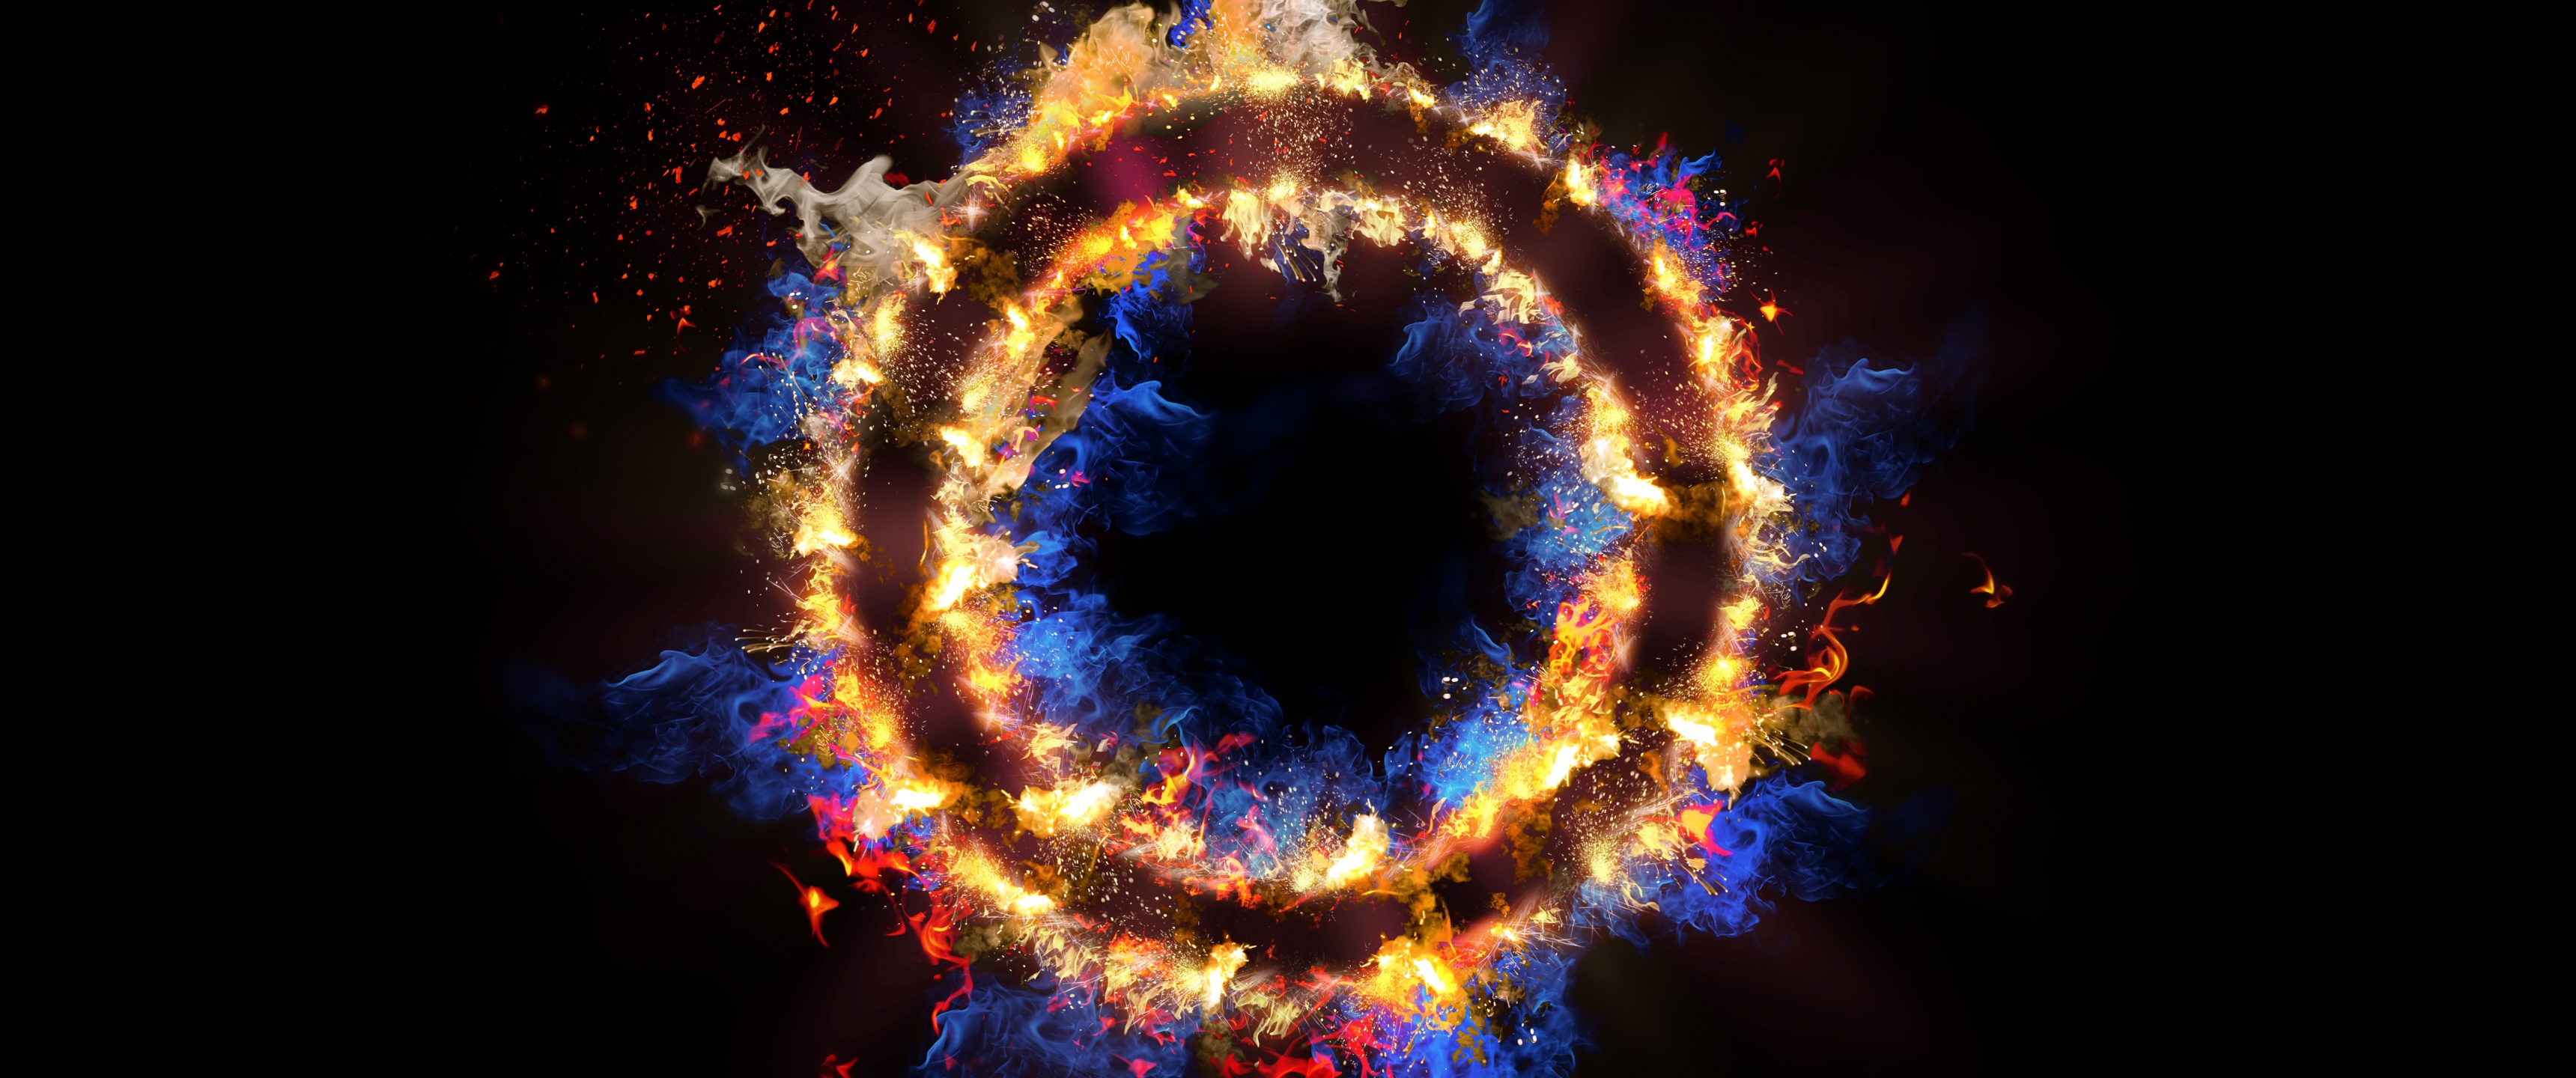 690+ Circle HD Wallpapers and Backgrounds